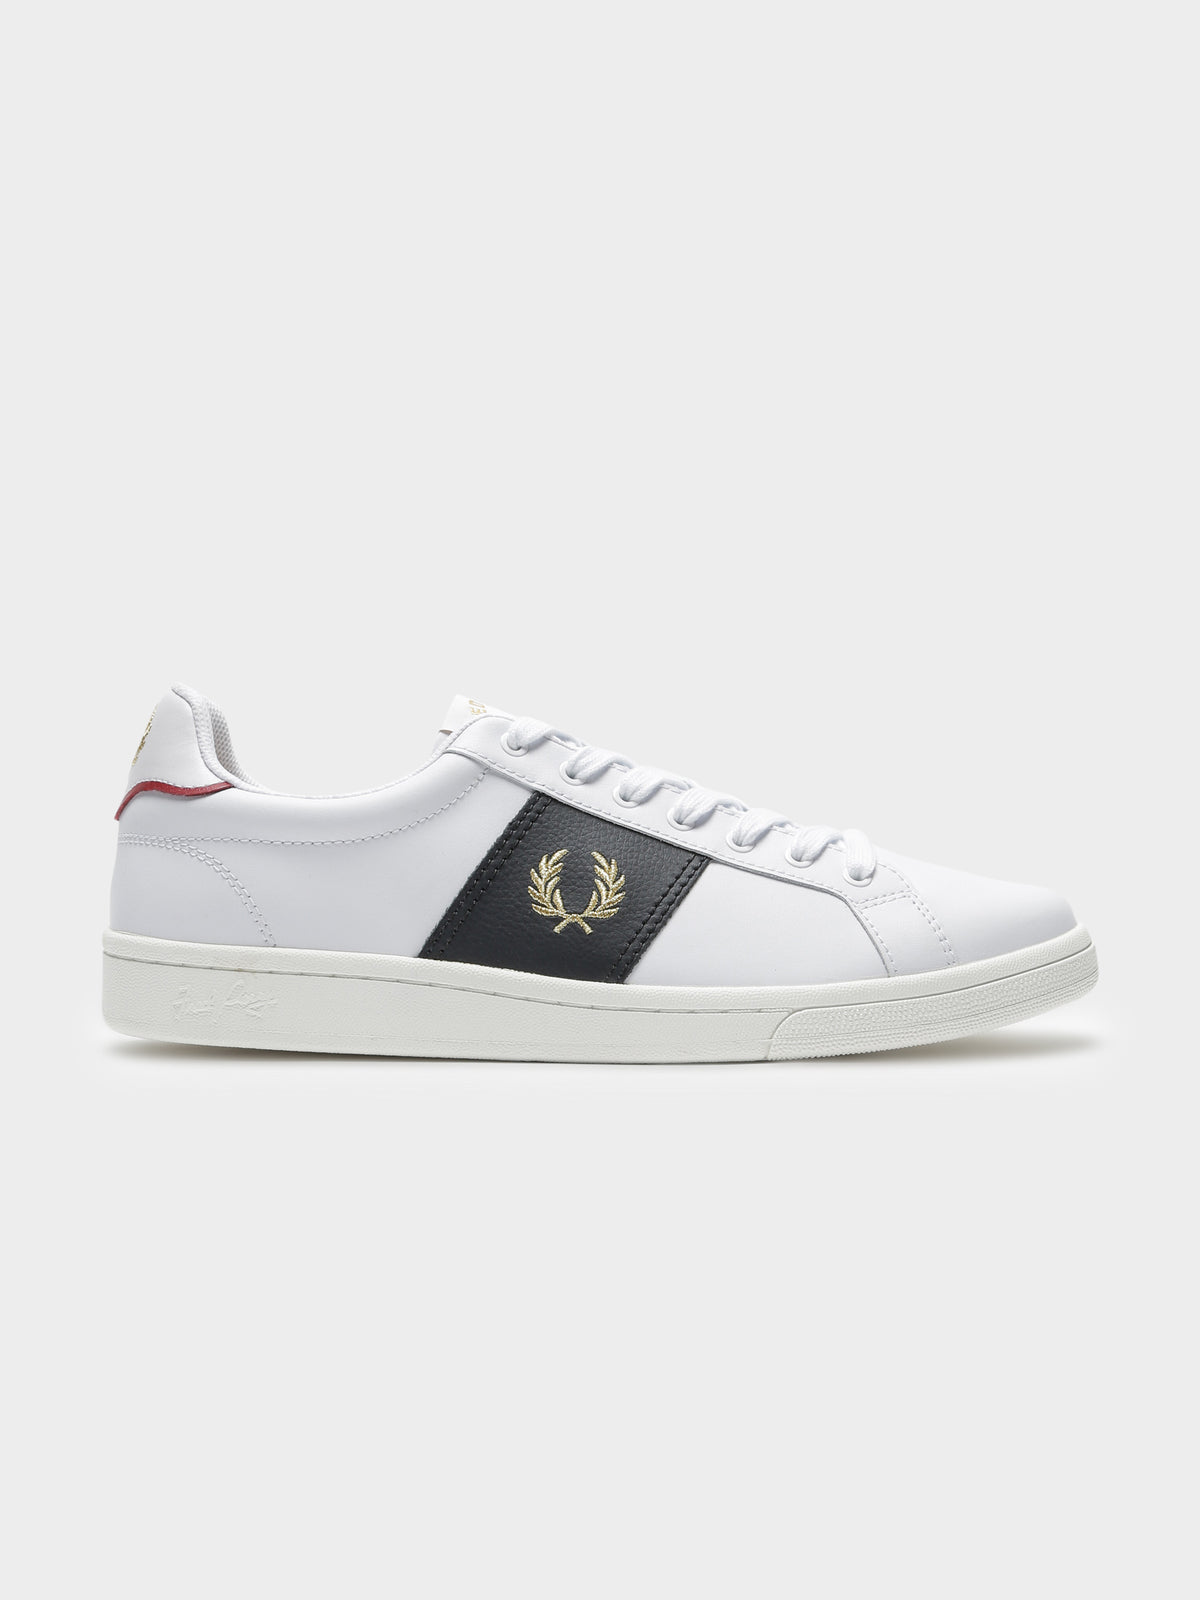 Mens B721 Leather Sneaker in White and Black